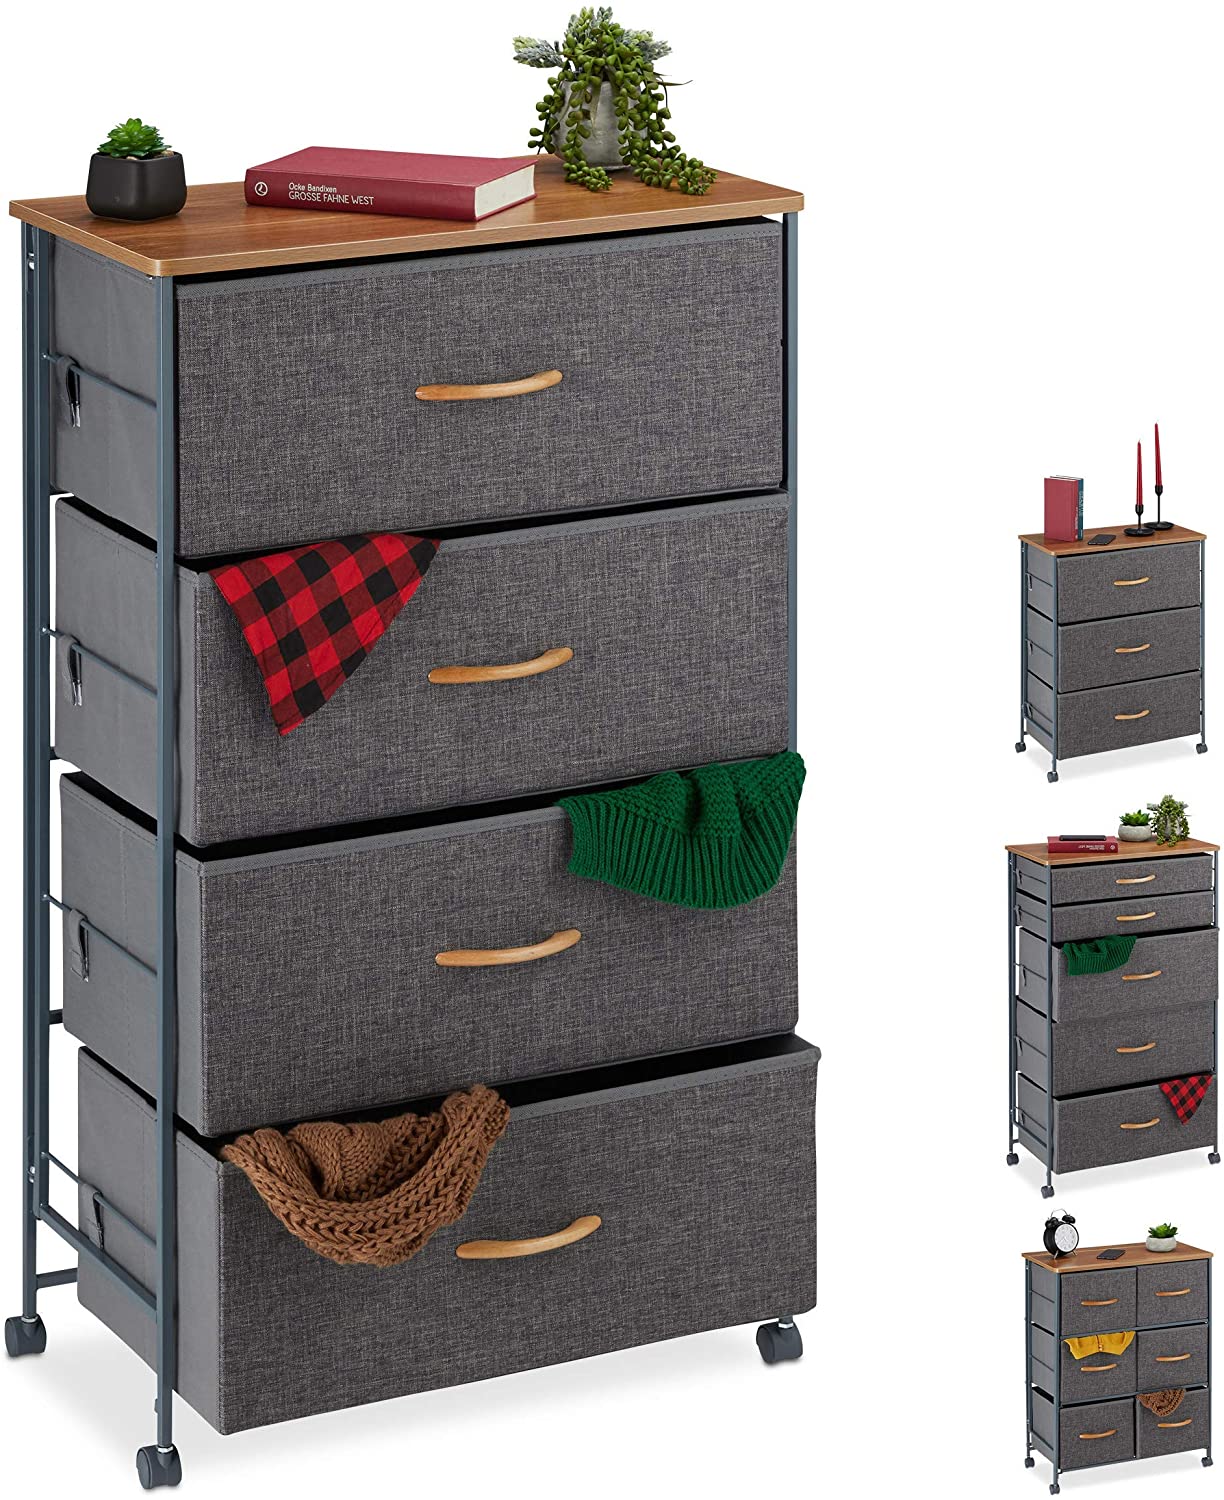 Relaxdays Drawer Cabinet With Wheels 4 Fabric Drawers Decorative Fabric Cab